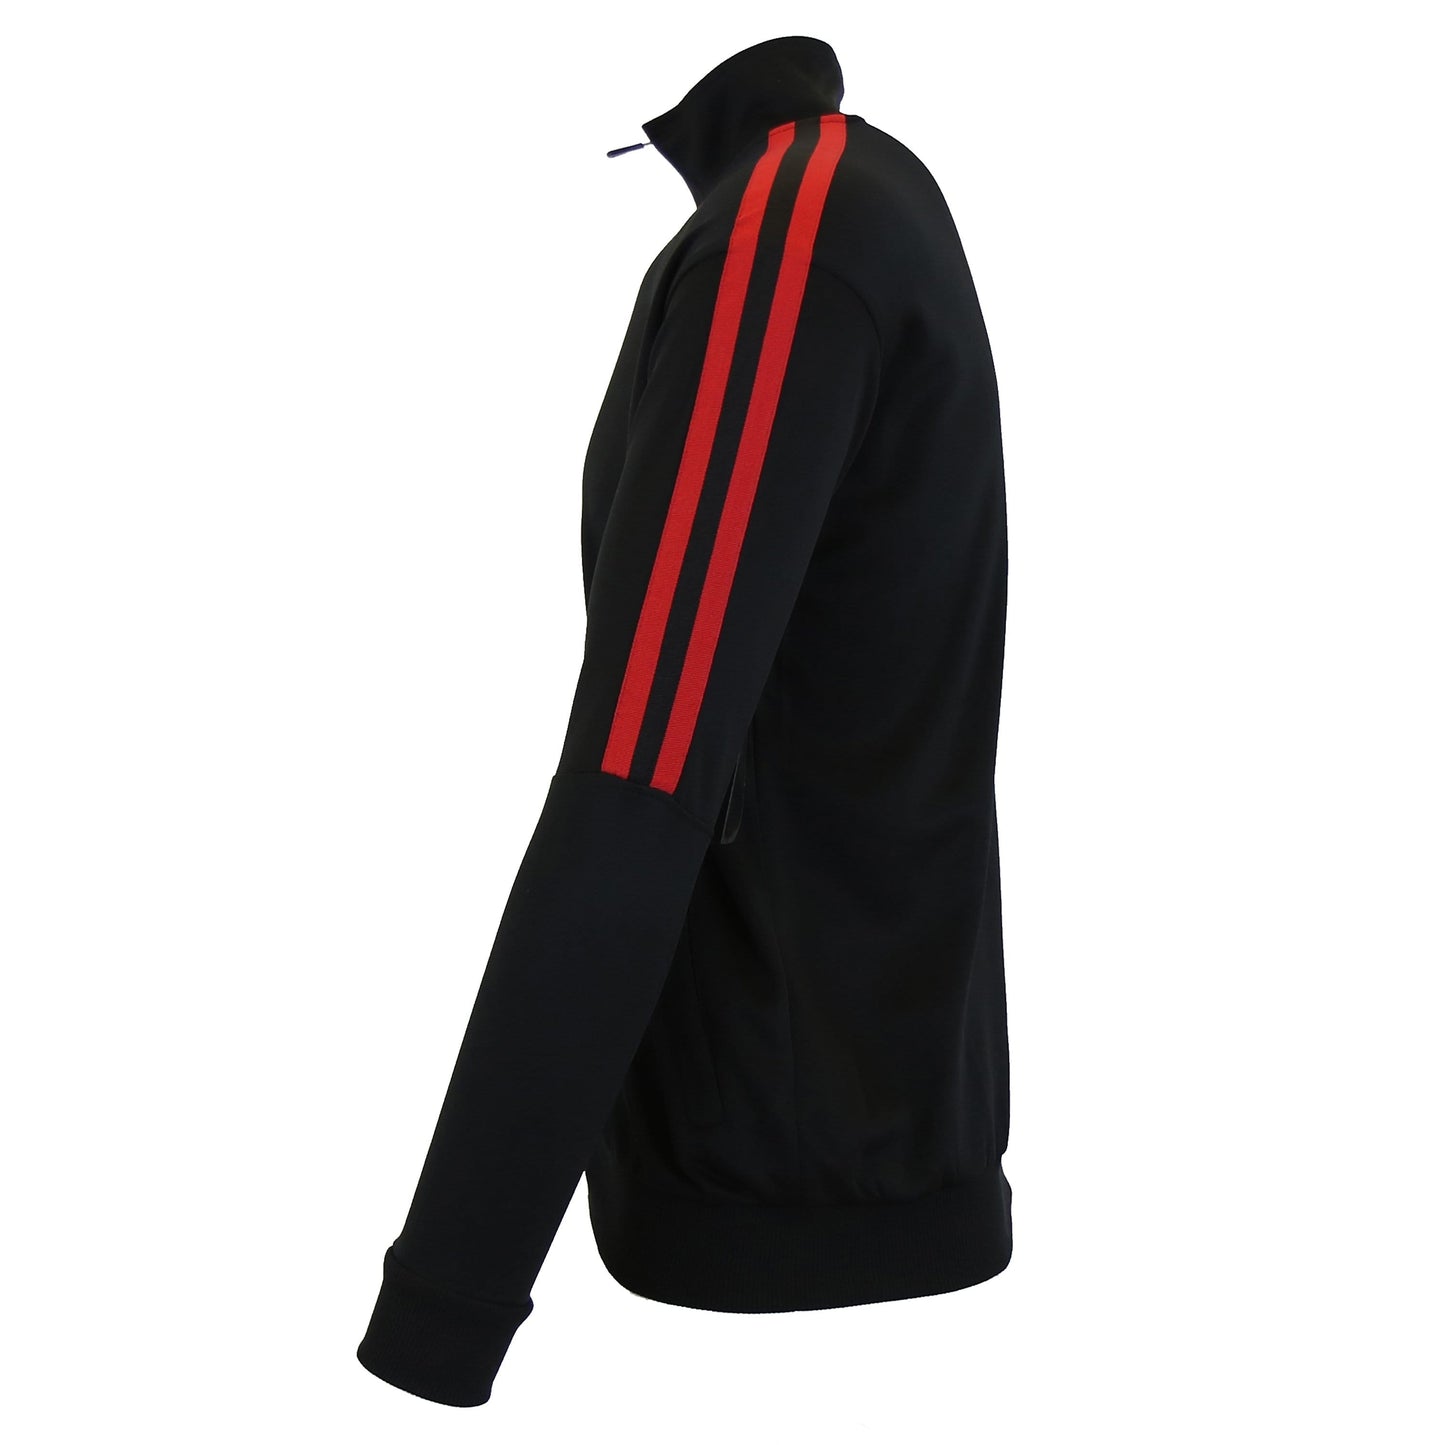 Men's Active Performance Track Jacket - GalaxybyHarvic